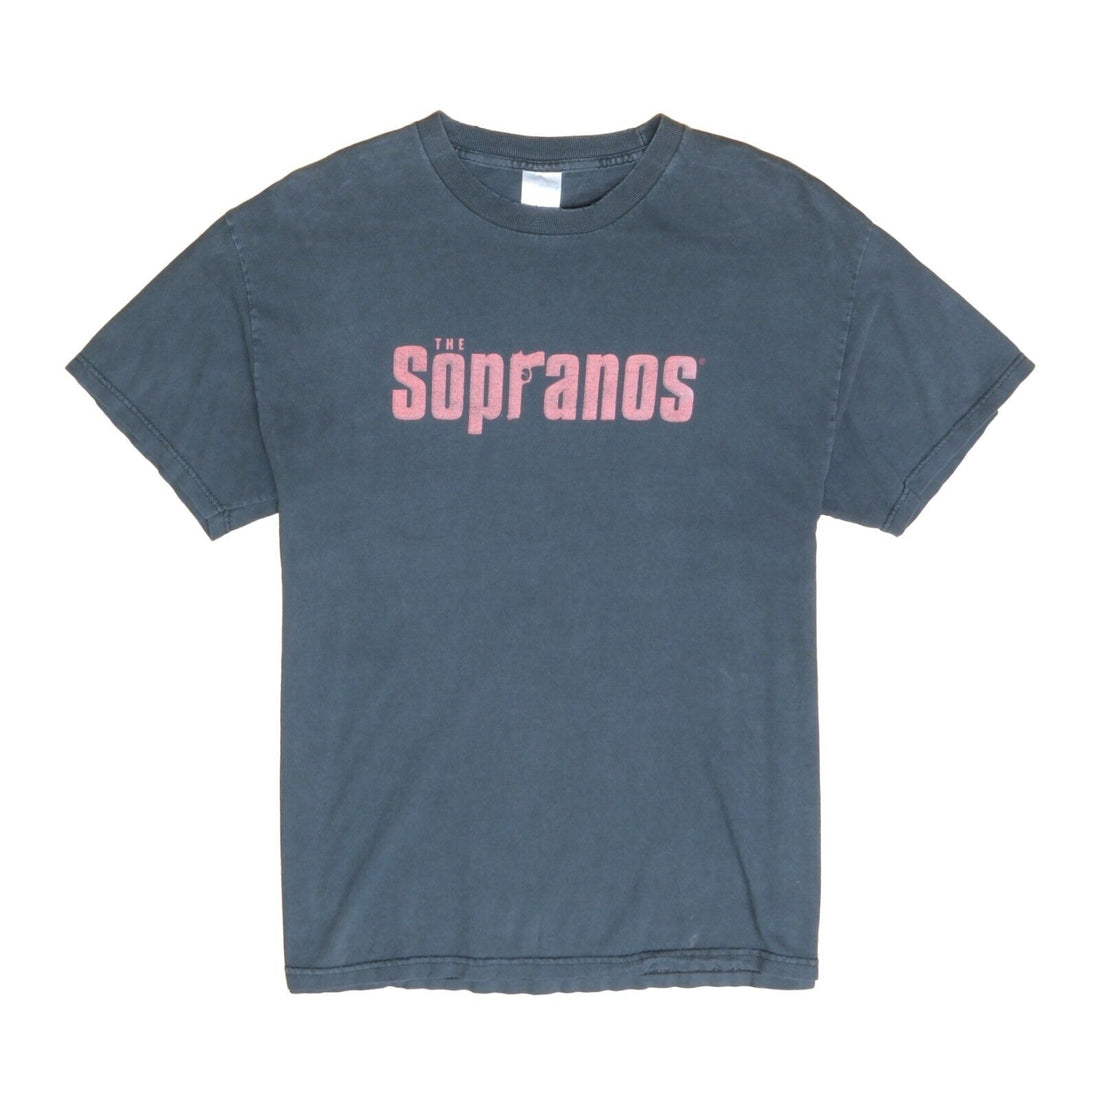 Vintage The Sopranos T-Shirt Size Medium HBO TV Promo Spell Out